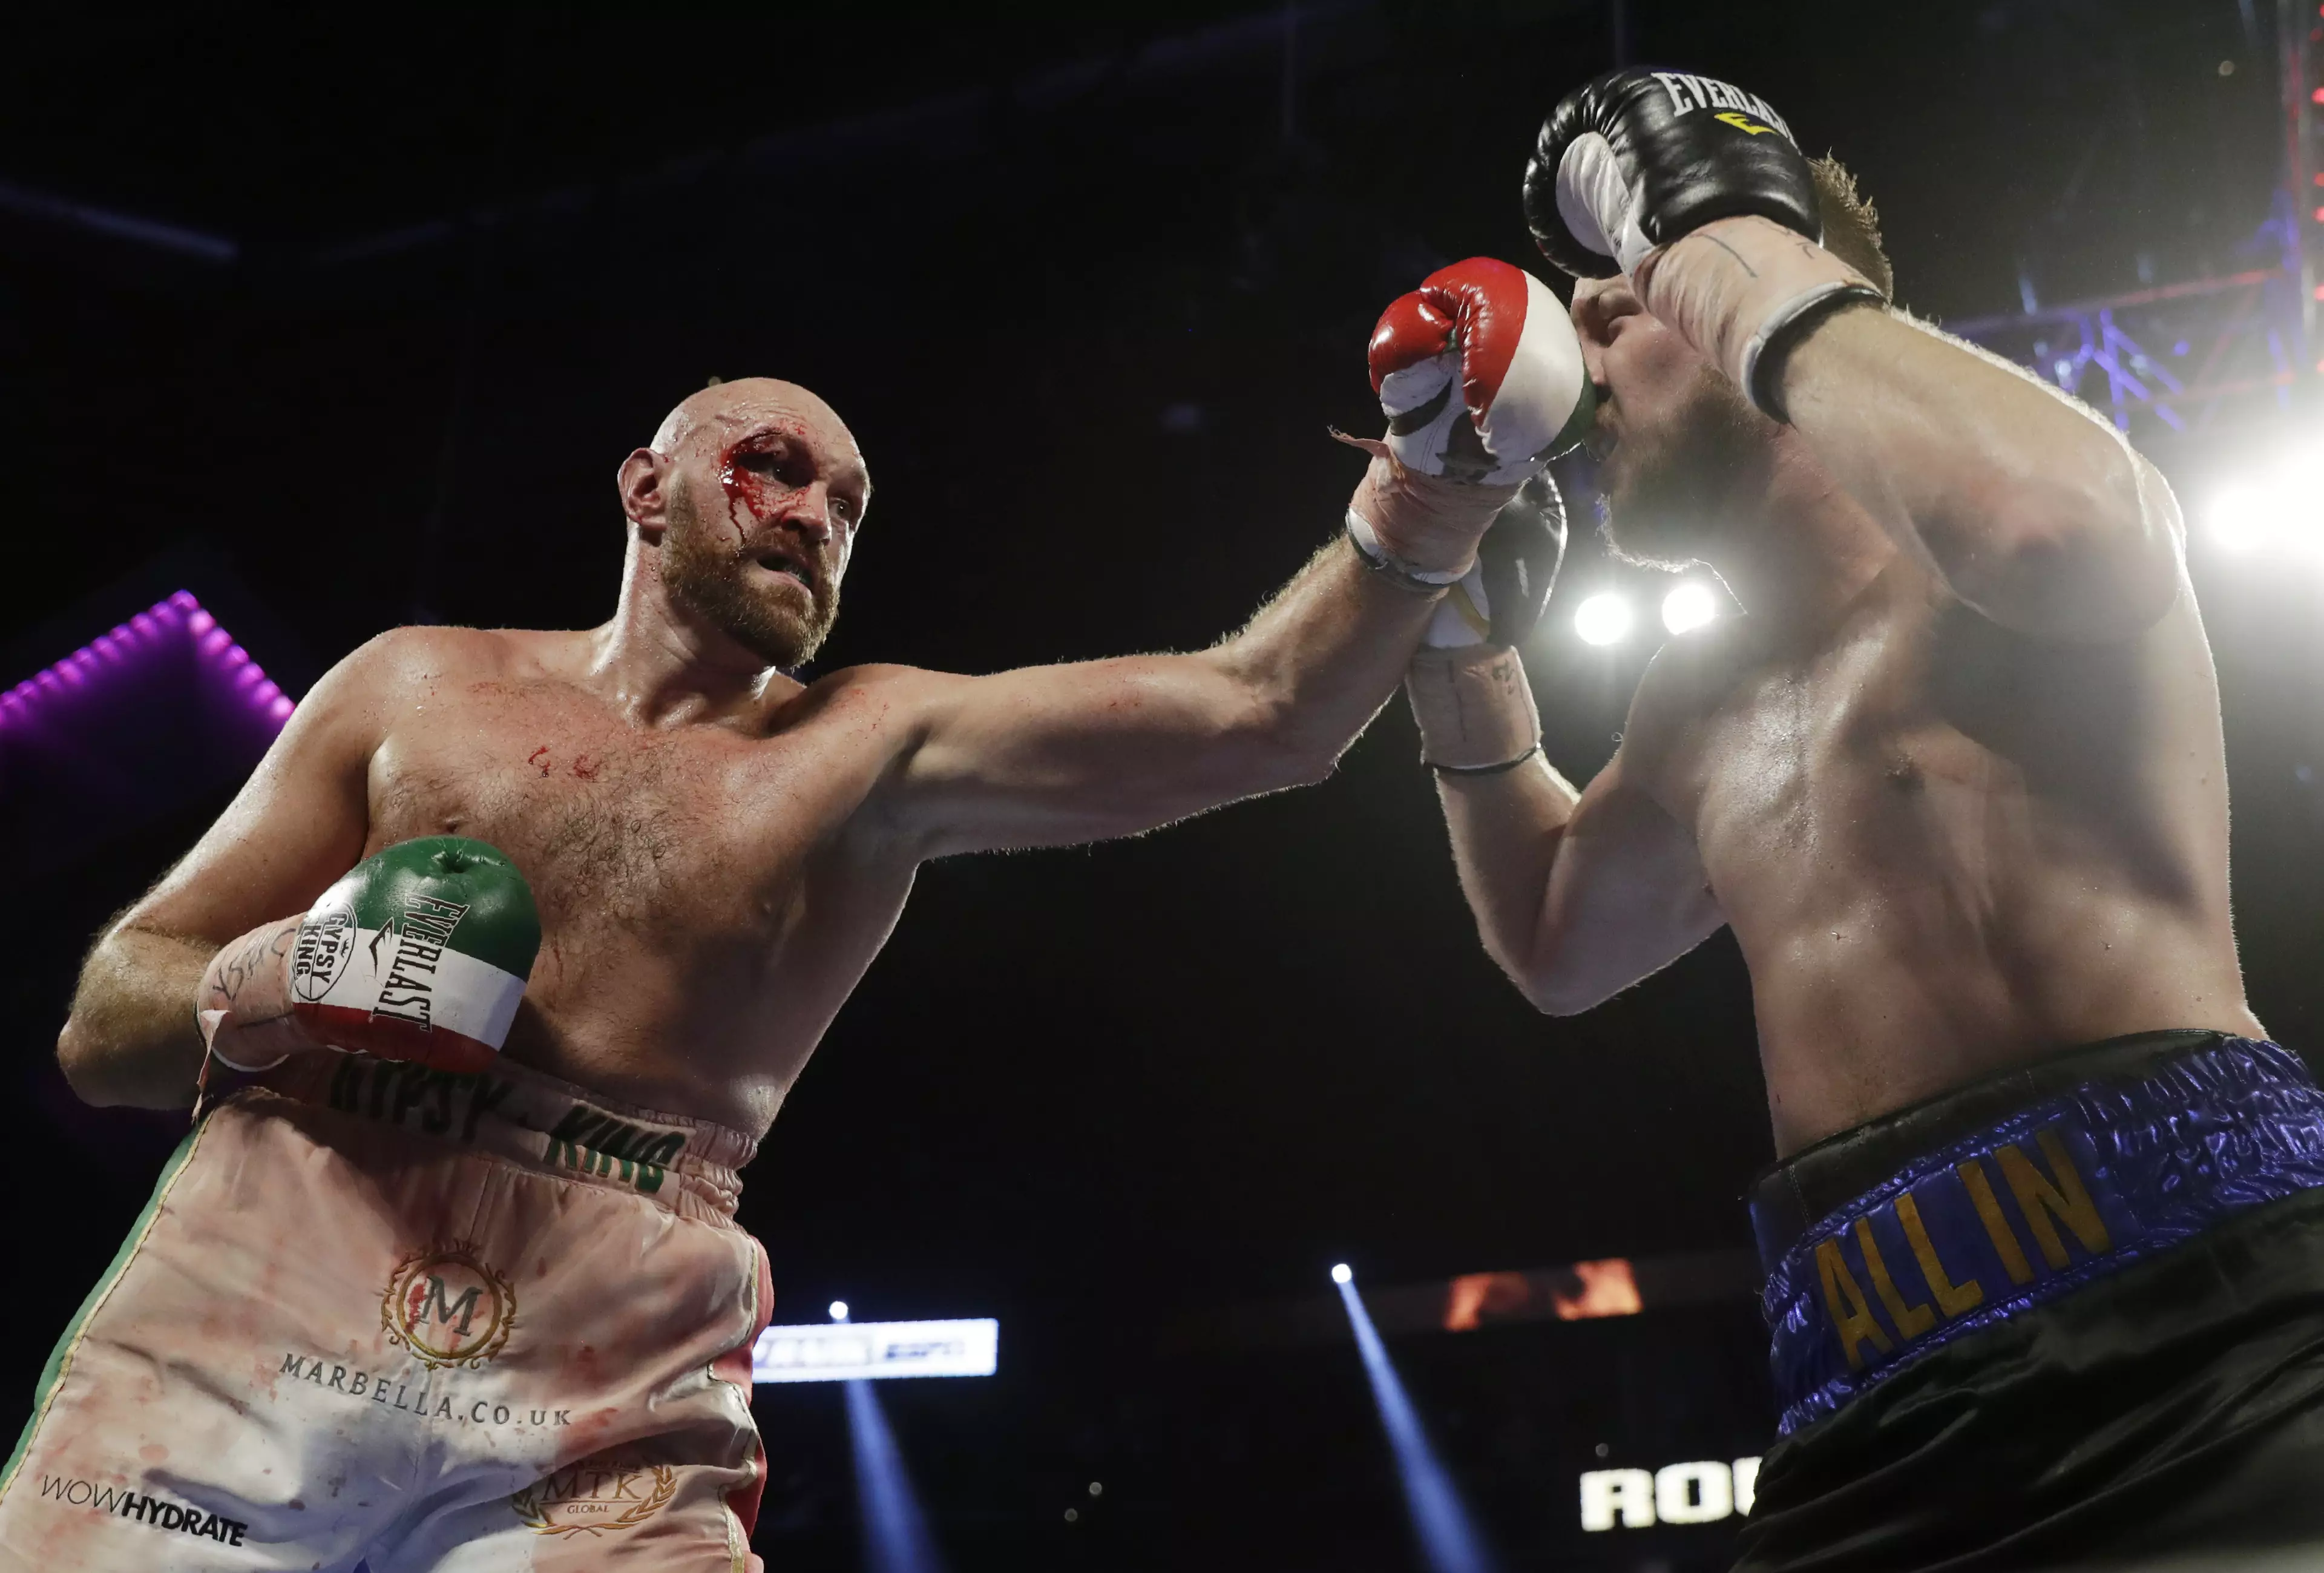 Fury won the fight following a unanimous decision of 116-112, 117-111 and 118-110 on the judges' scorecards.